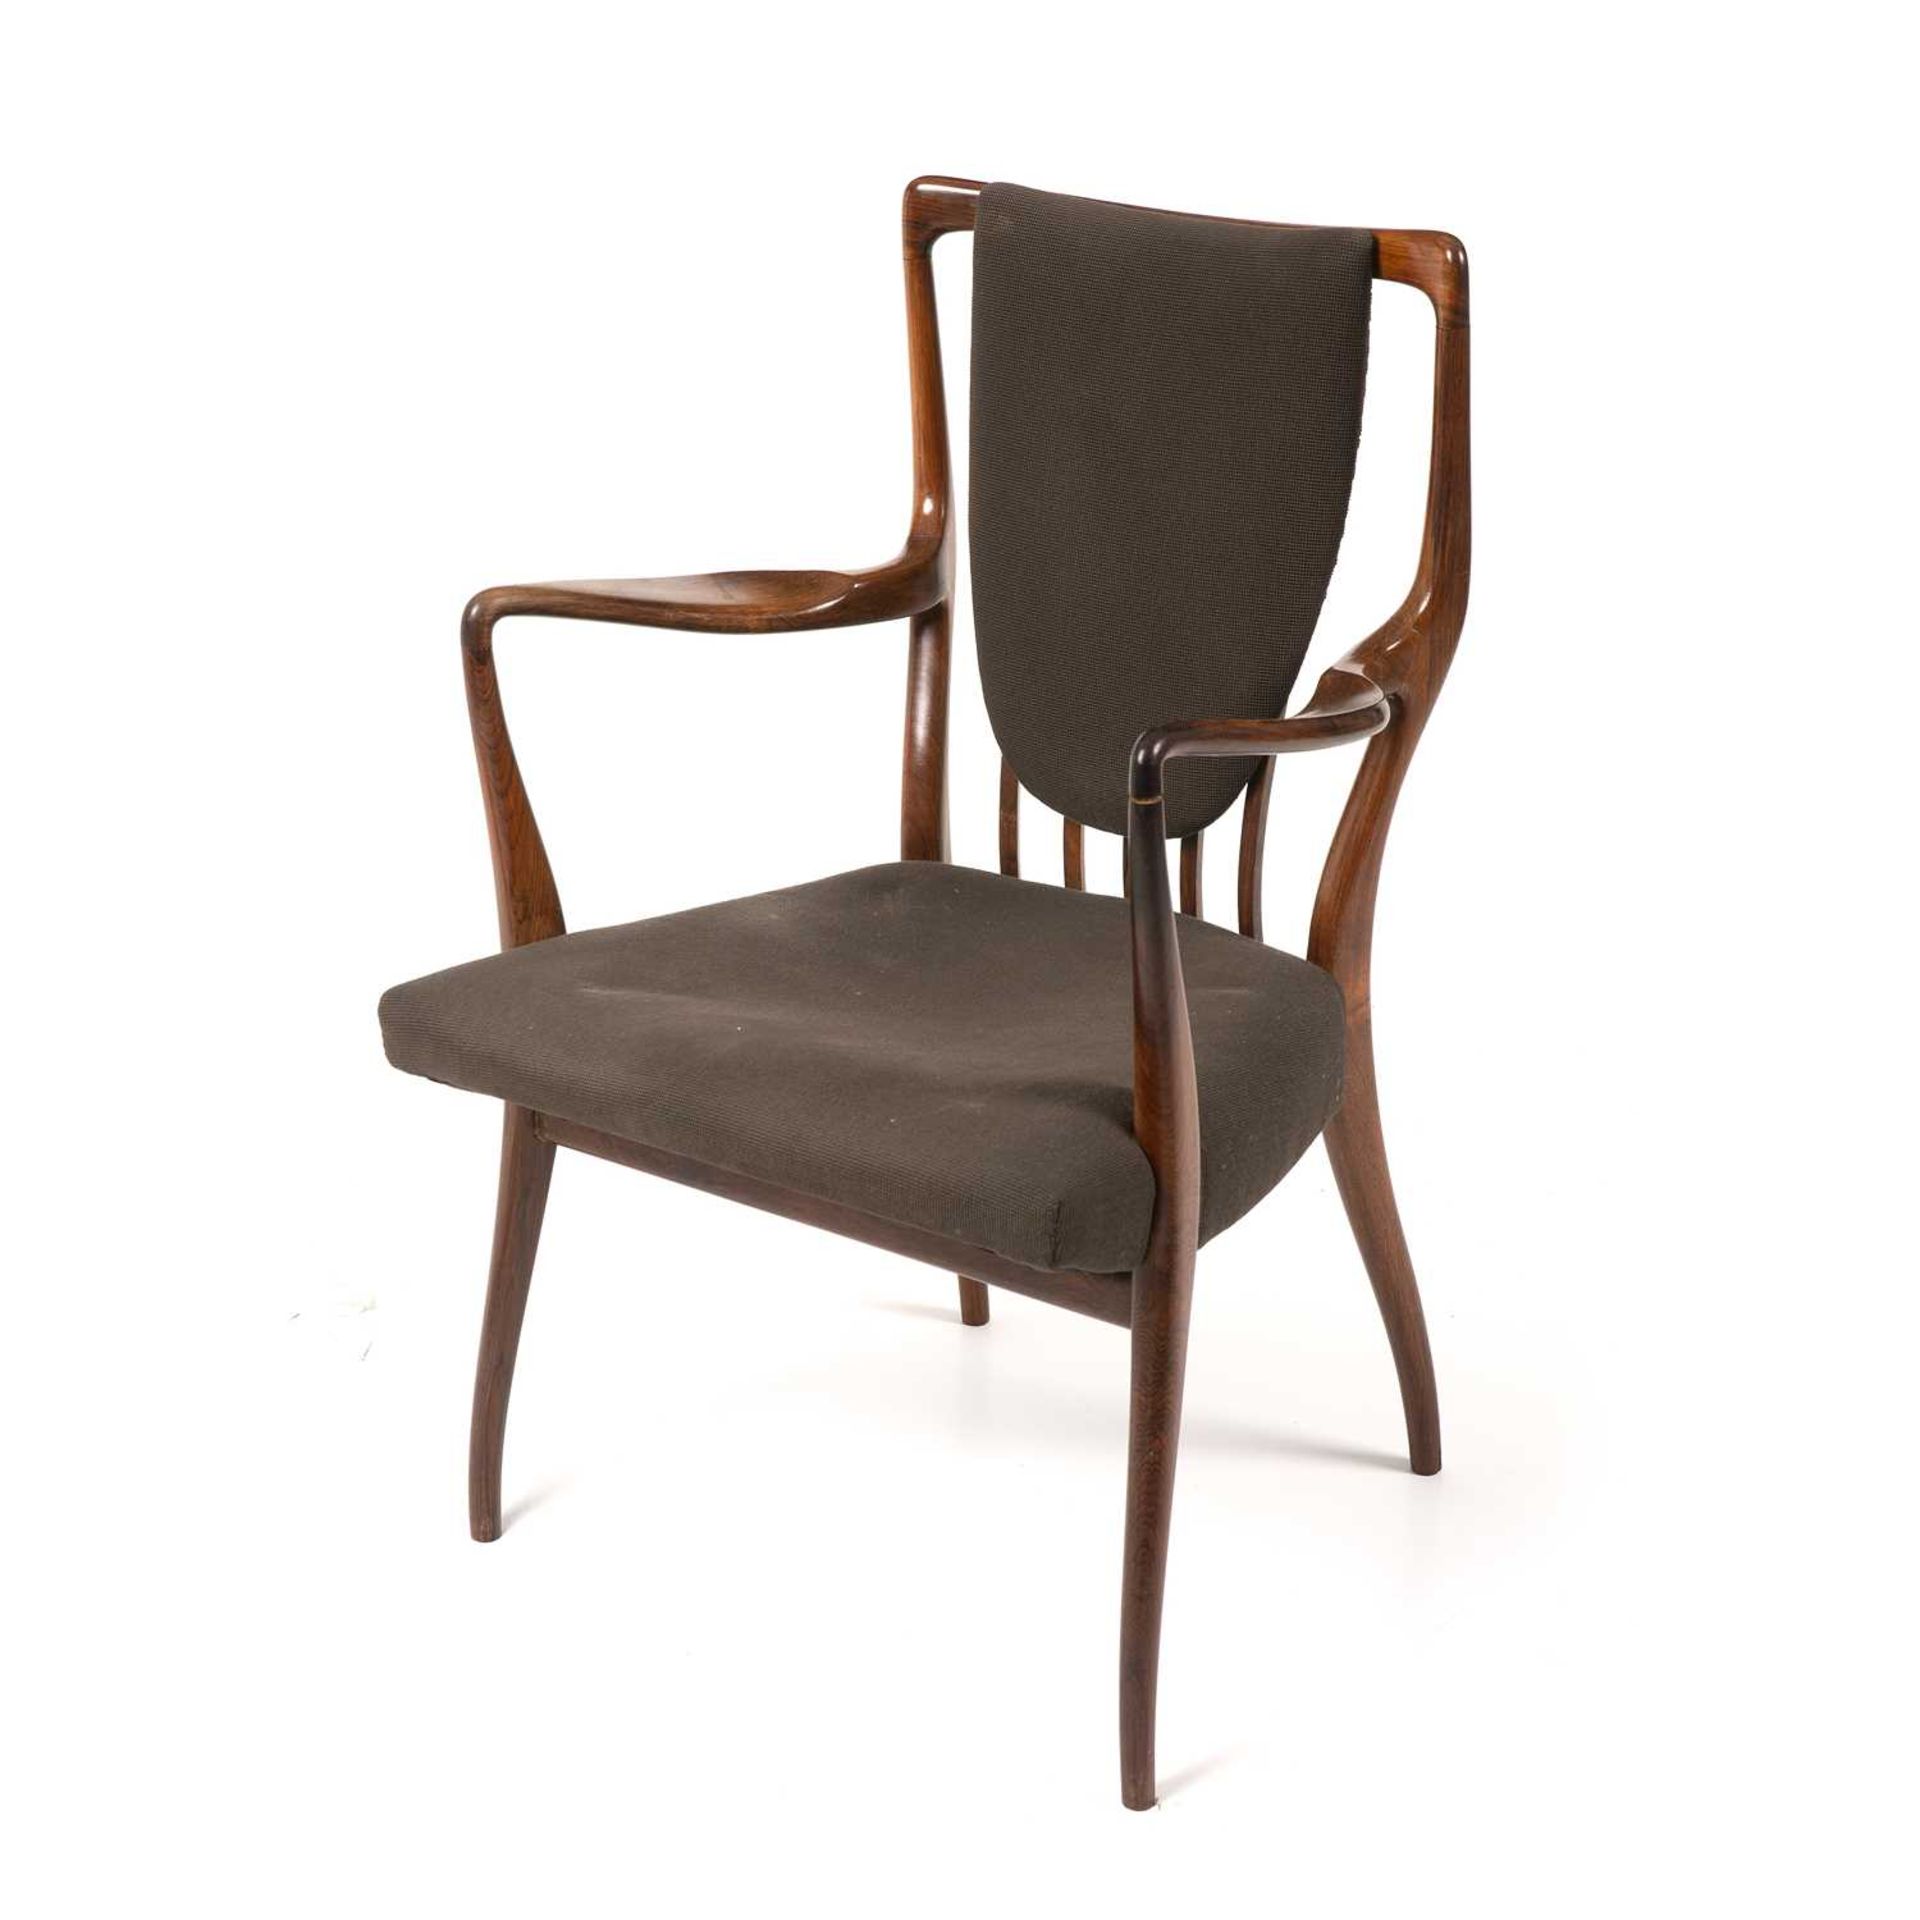 Andrew John Milne Armchair with upholstered seat 91cm high, 56cm wide, 52cm deep. - Image 4 of 5